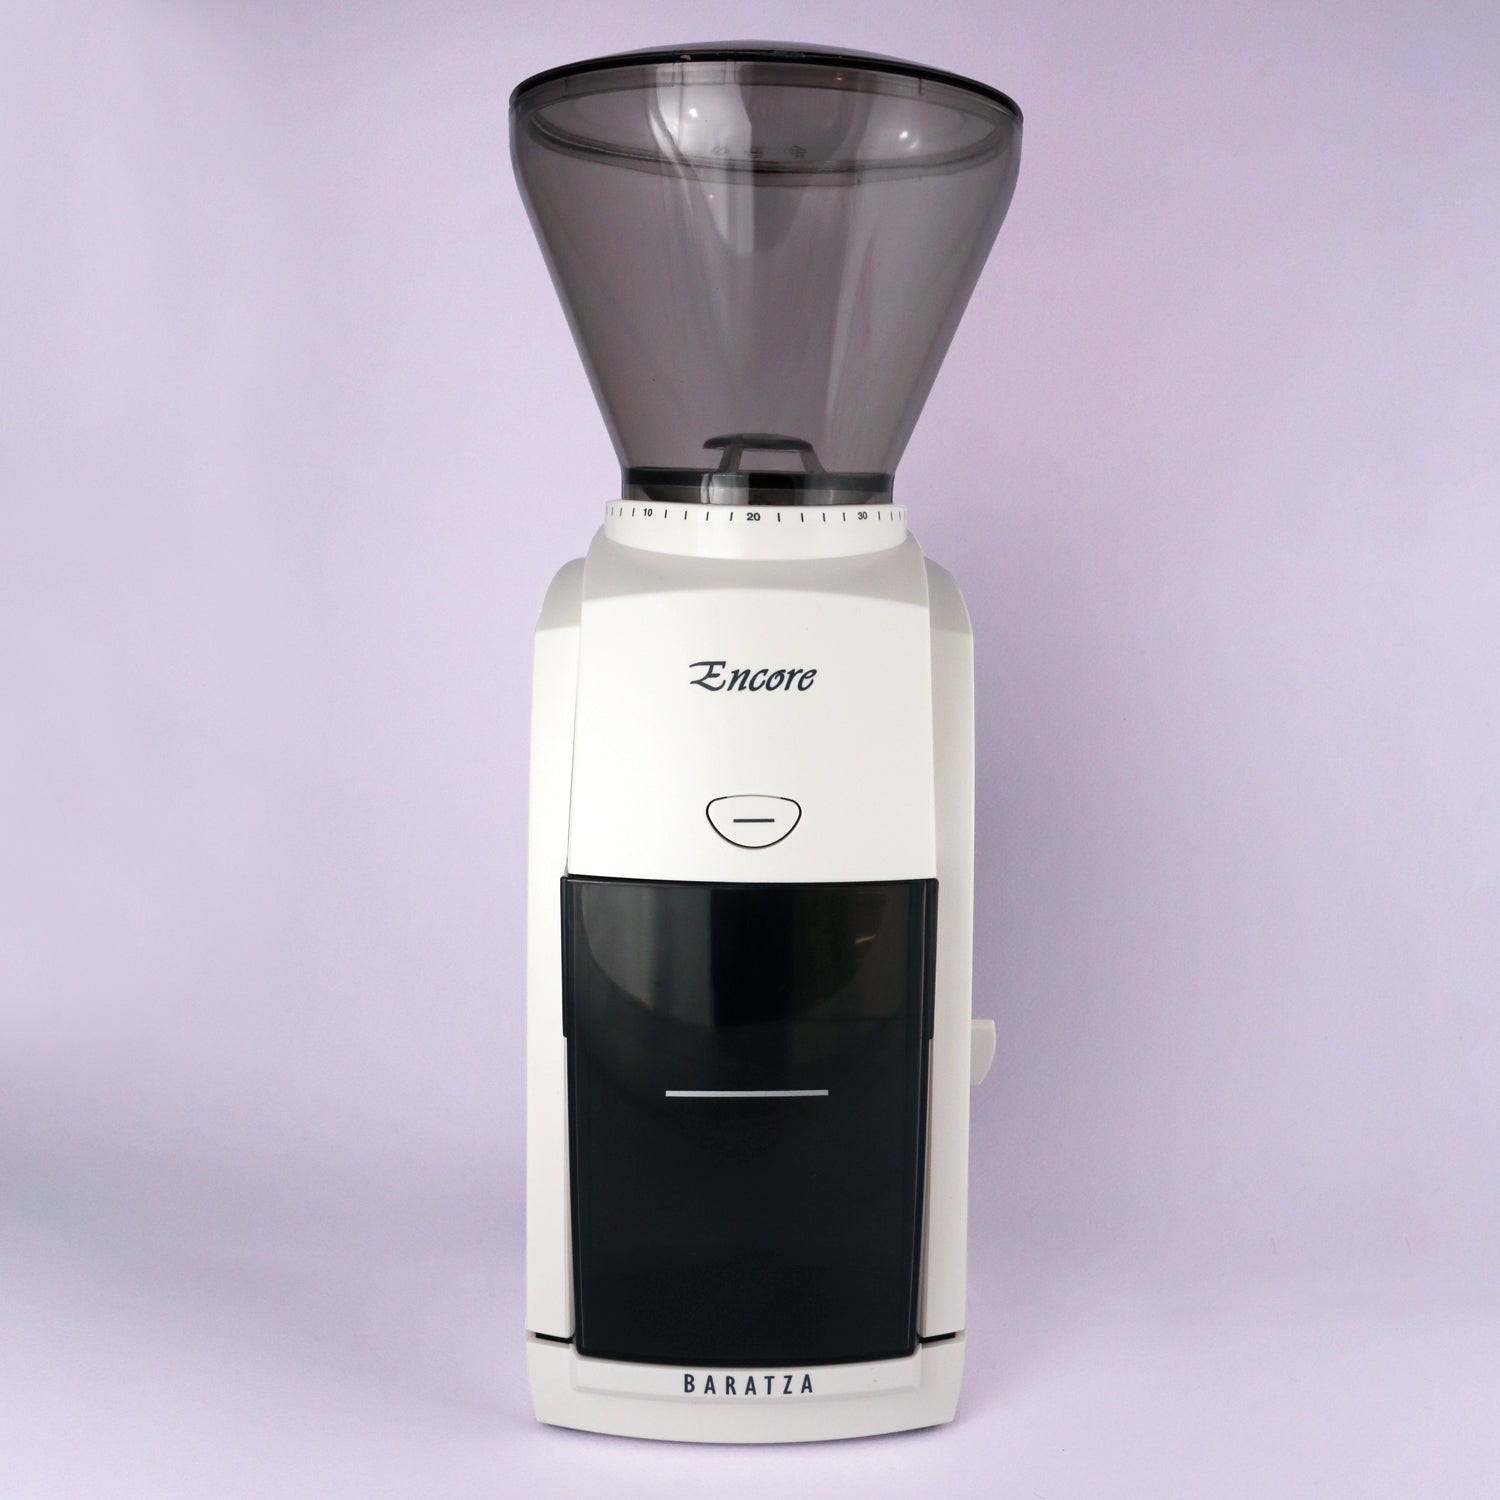 A black Tandem Baratza Encore Coffee Grinder with a transparent bean hopper on top, positioned against a neutral gray background.